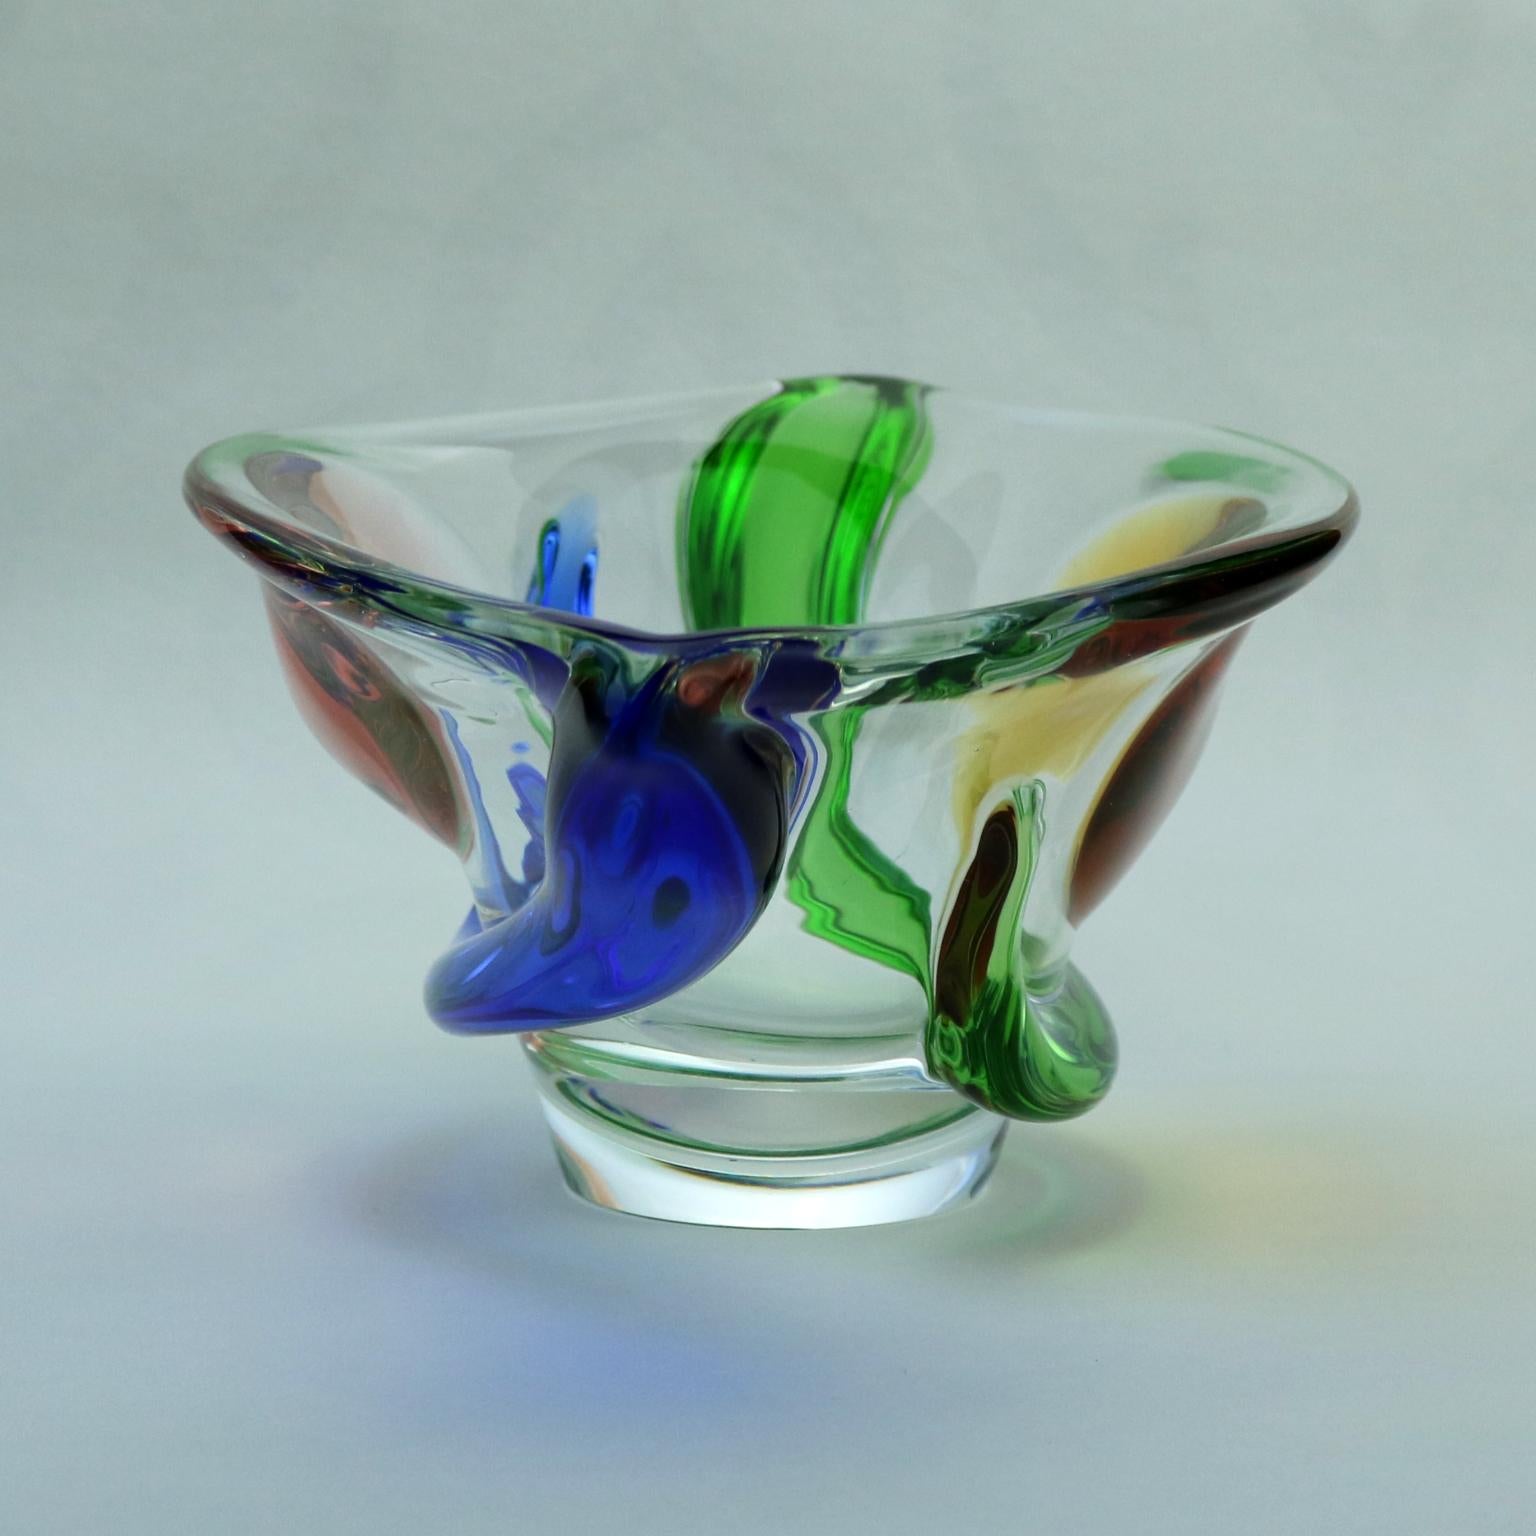 A stunning Czech heavy glass biomorphic bowl. Made by the Mstisov glassworks, and designed by Frantisek Zemek in the 1950s-1960s, part of his 'Rhapsody' collection. Would make an excellent addition to any collection!